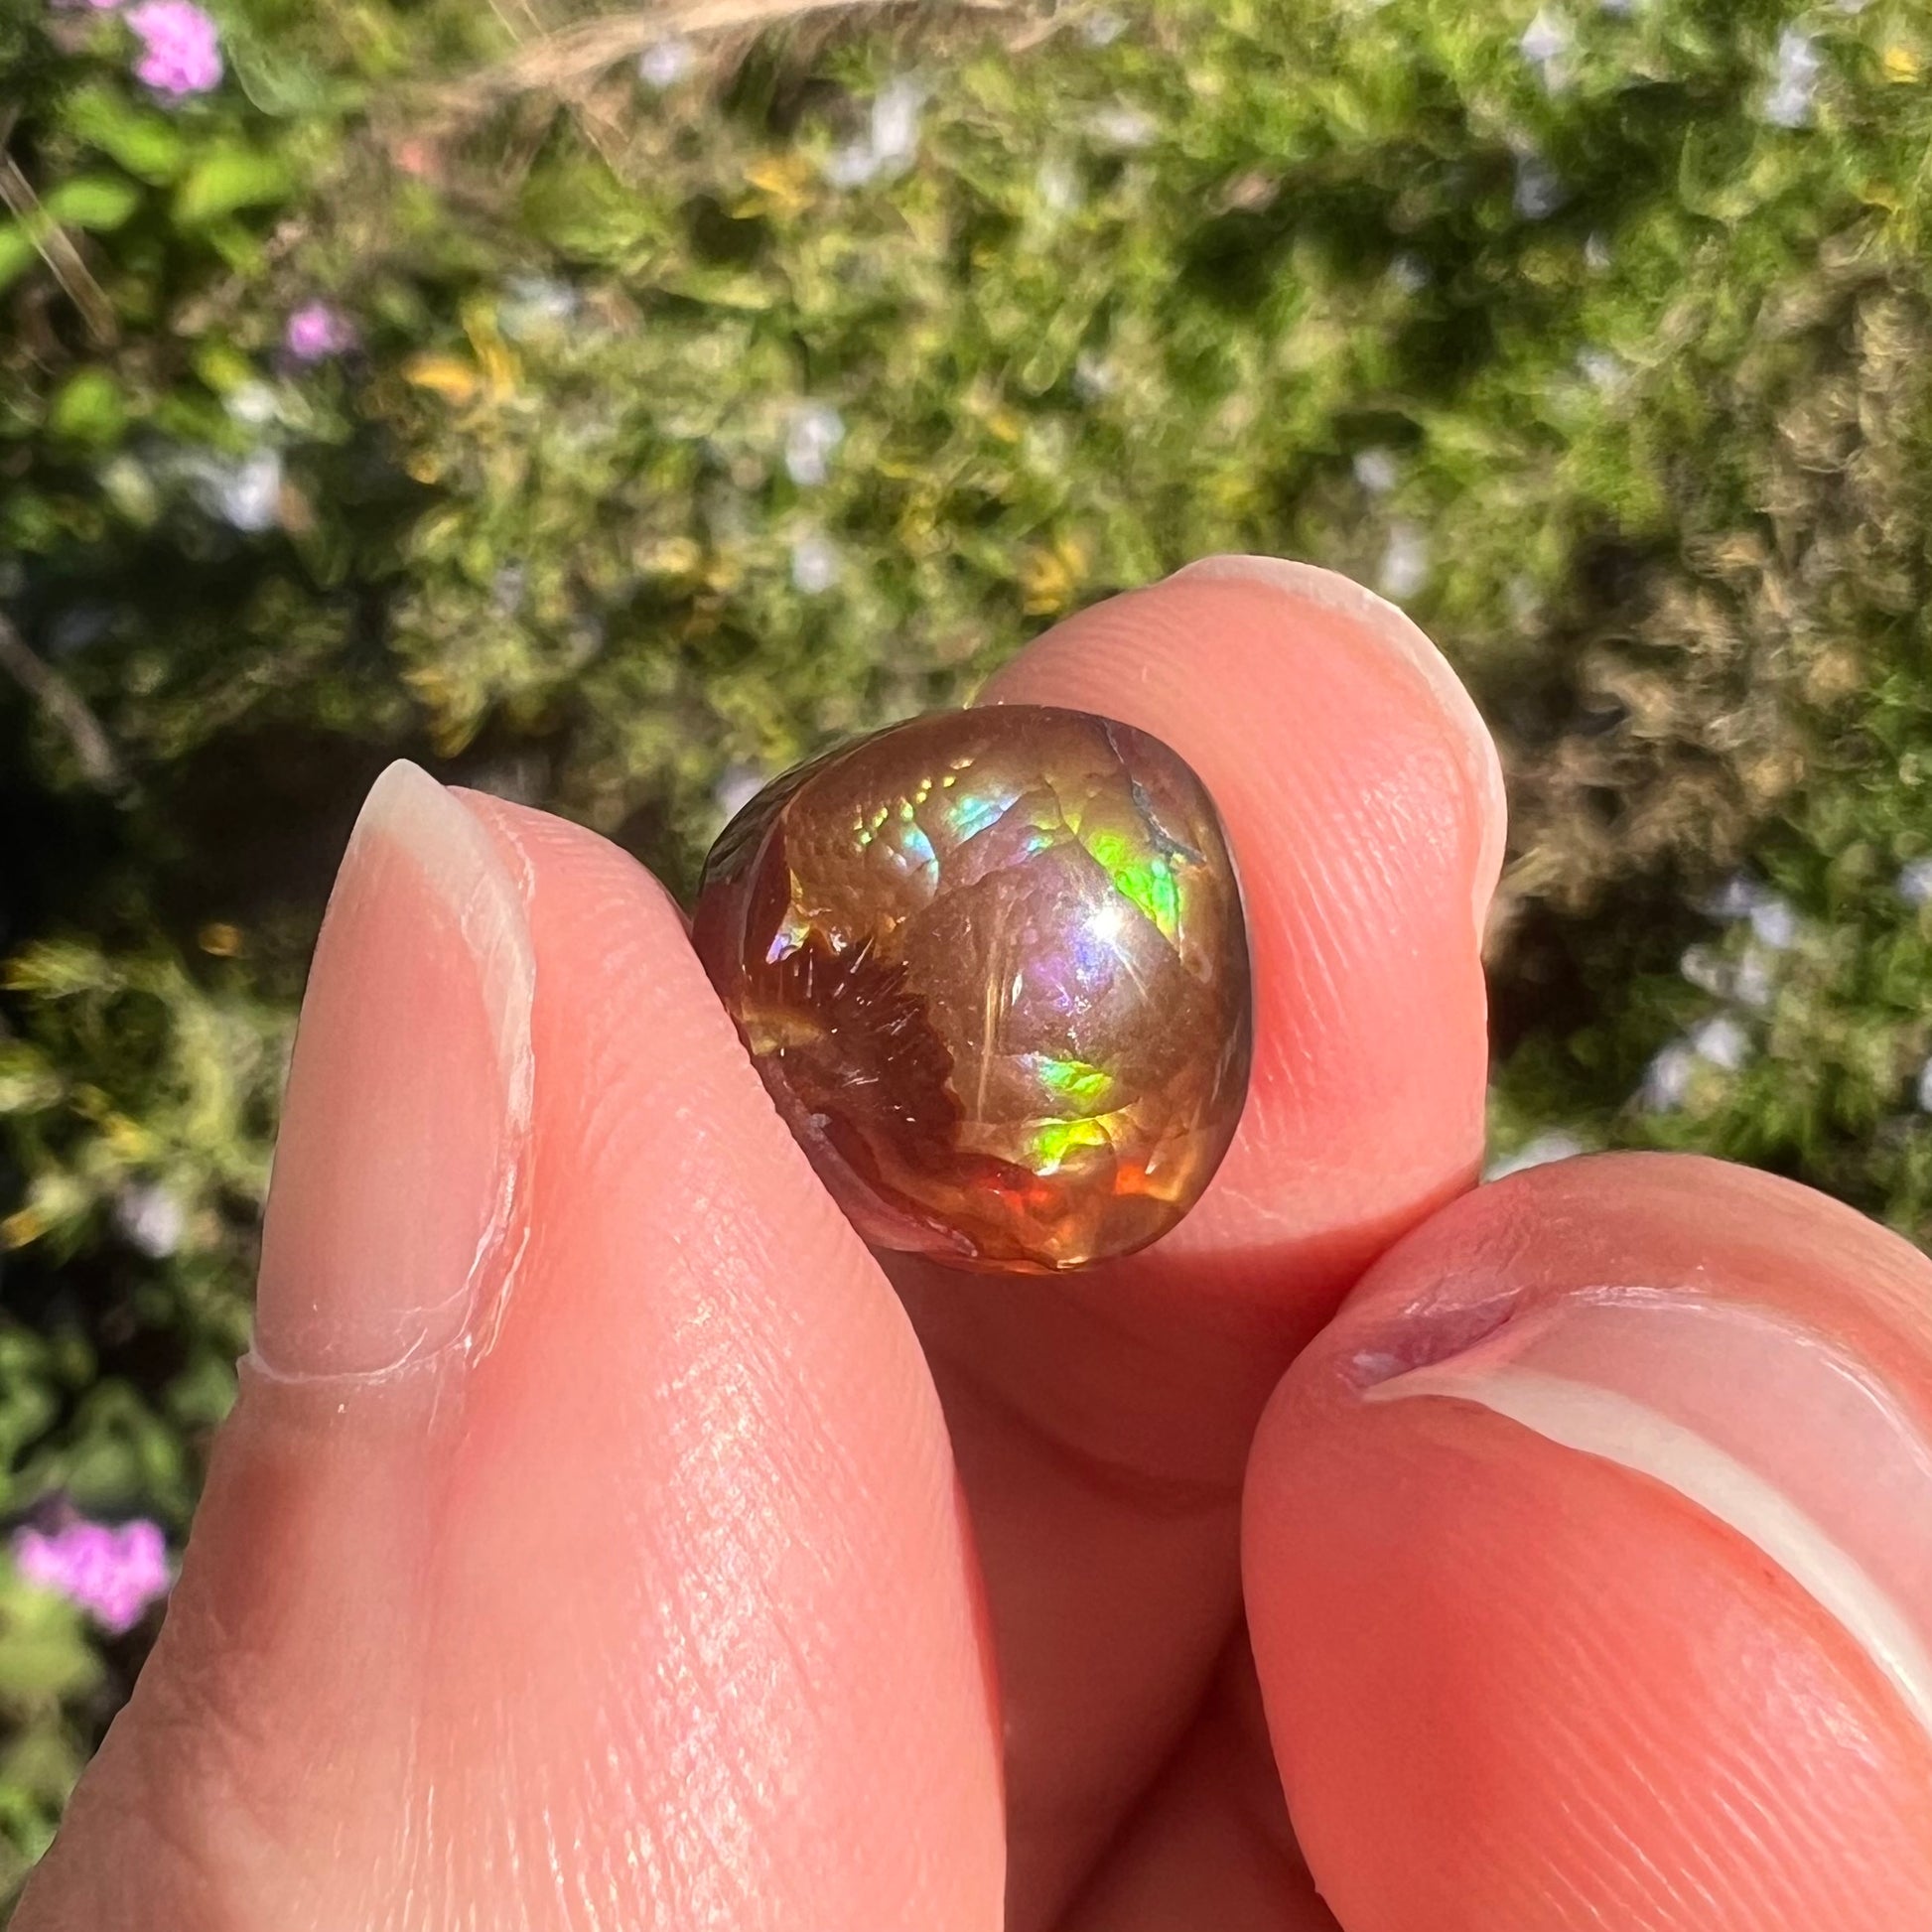 A loose, round cabochon cut Mexican fire agate gemstone.  The stone has a sagenite inclusion.